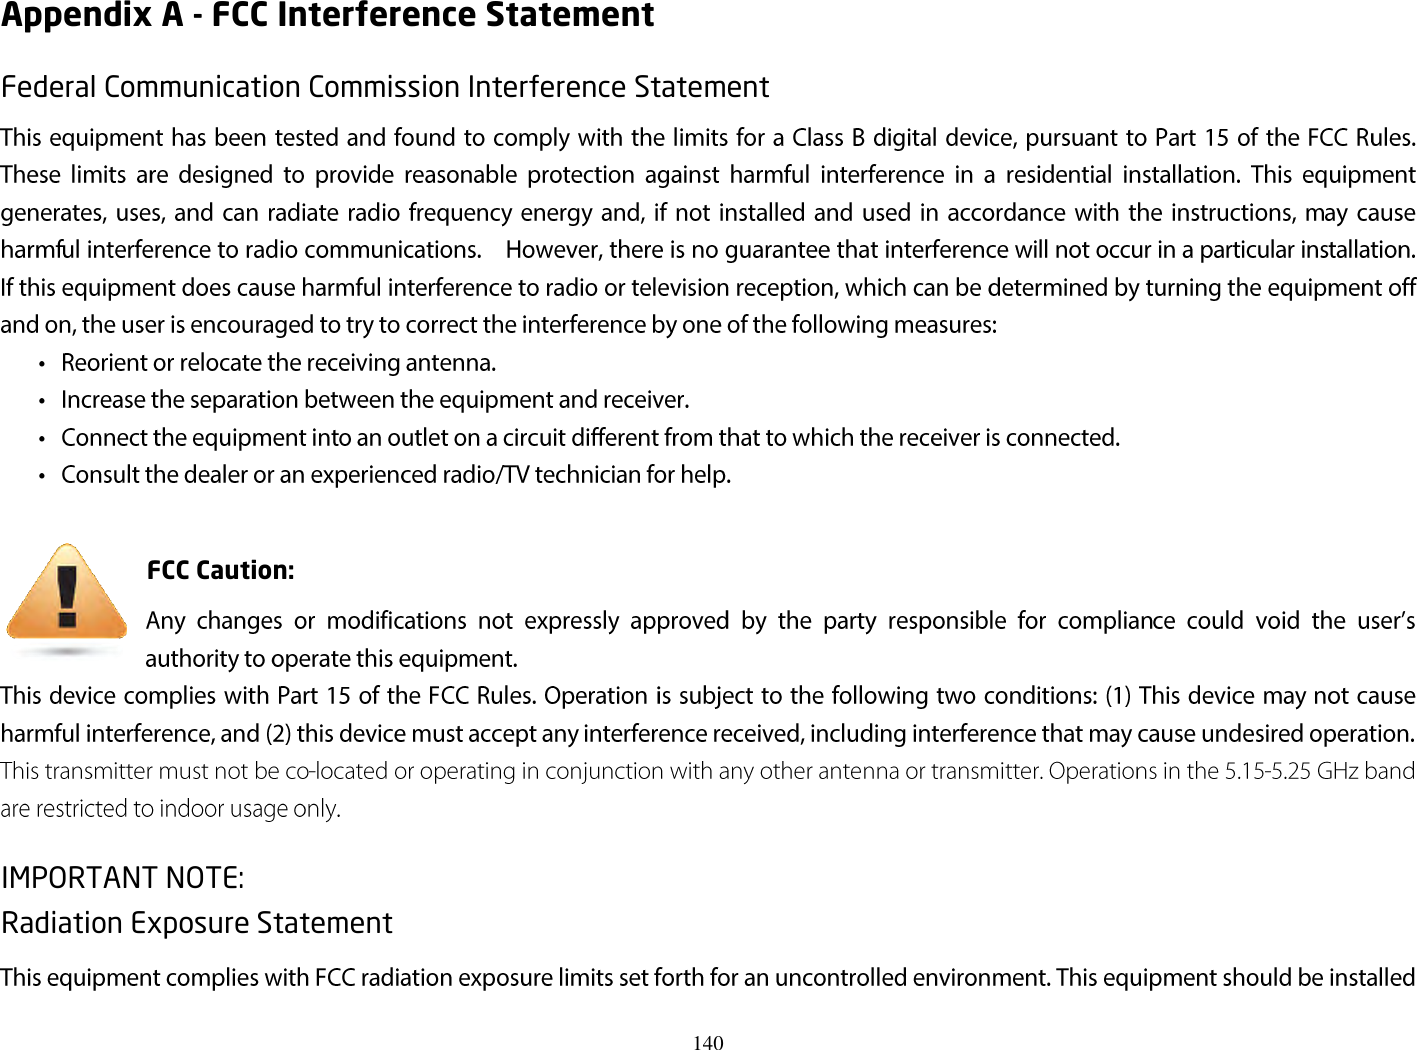 140  Appendix A - FCC Interference Statement Federal Communication Commission Interference Statement FCC Caution: IMPORTANT NOTE: Radiation Exposure Statement 